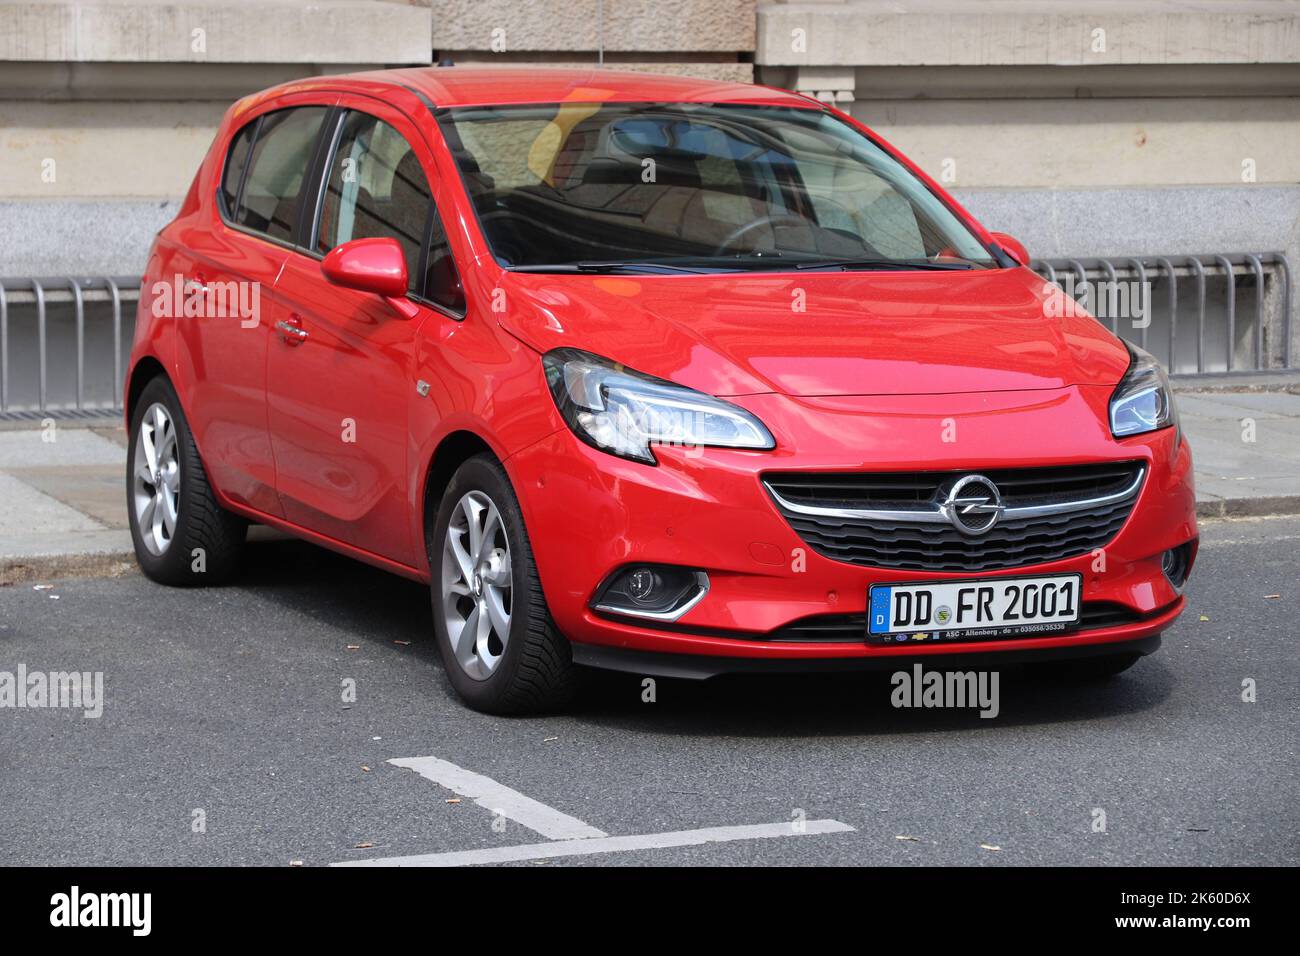 DRESDEN, GERMANY - MAY 10, 2018: Opel Corsa red hatchback small car parked in Germany. There were 45.8 million cars registered in Germany (as of 2017) Stock Photo